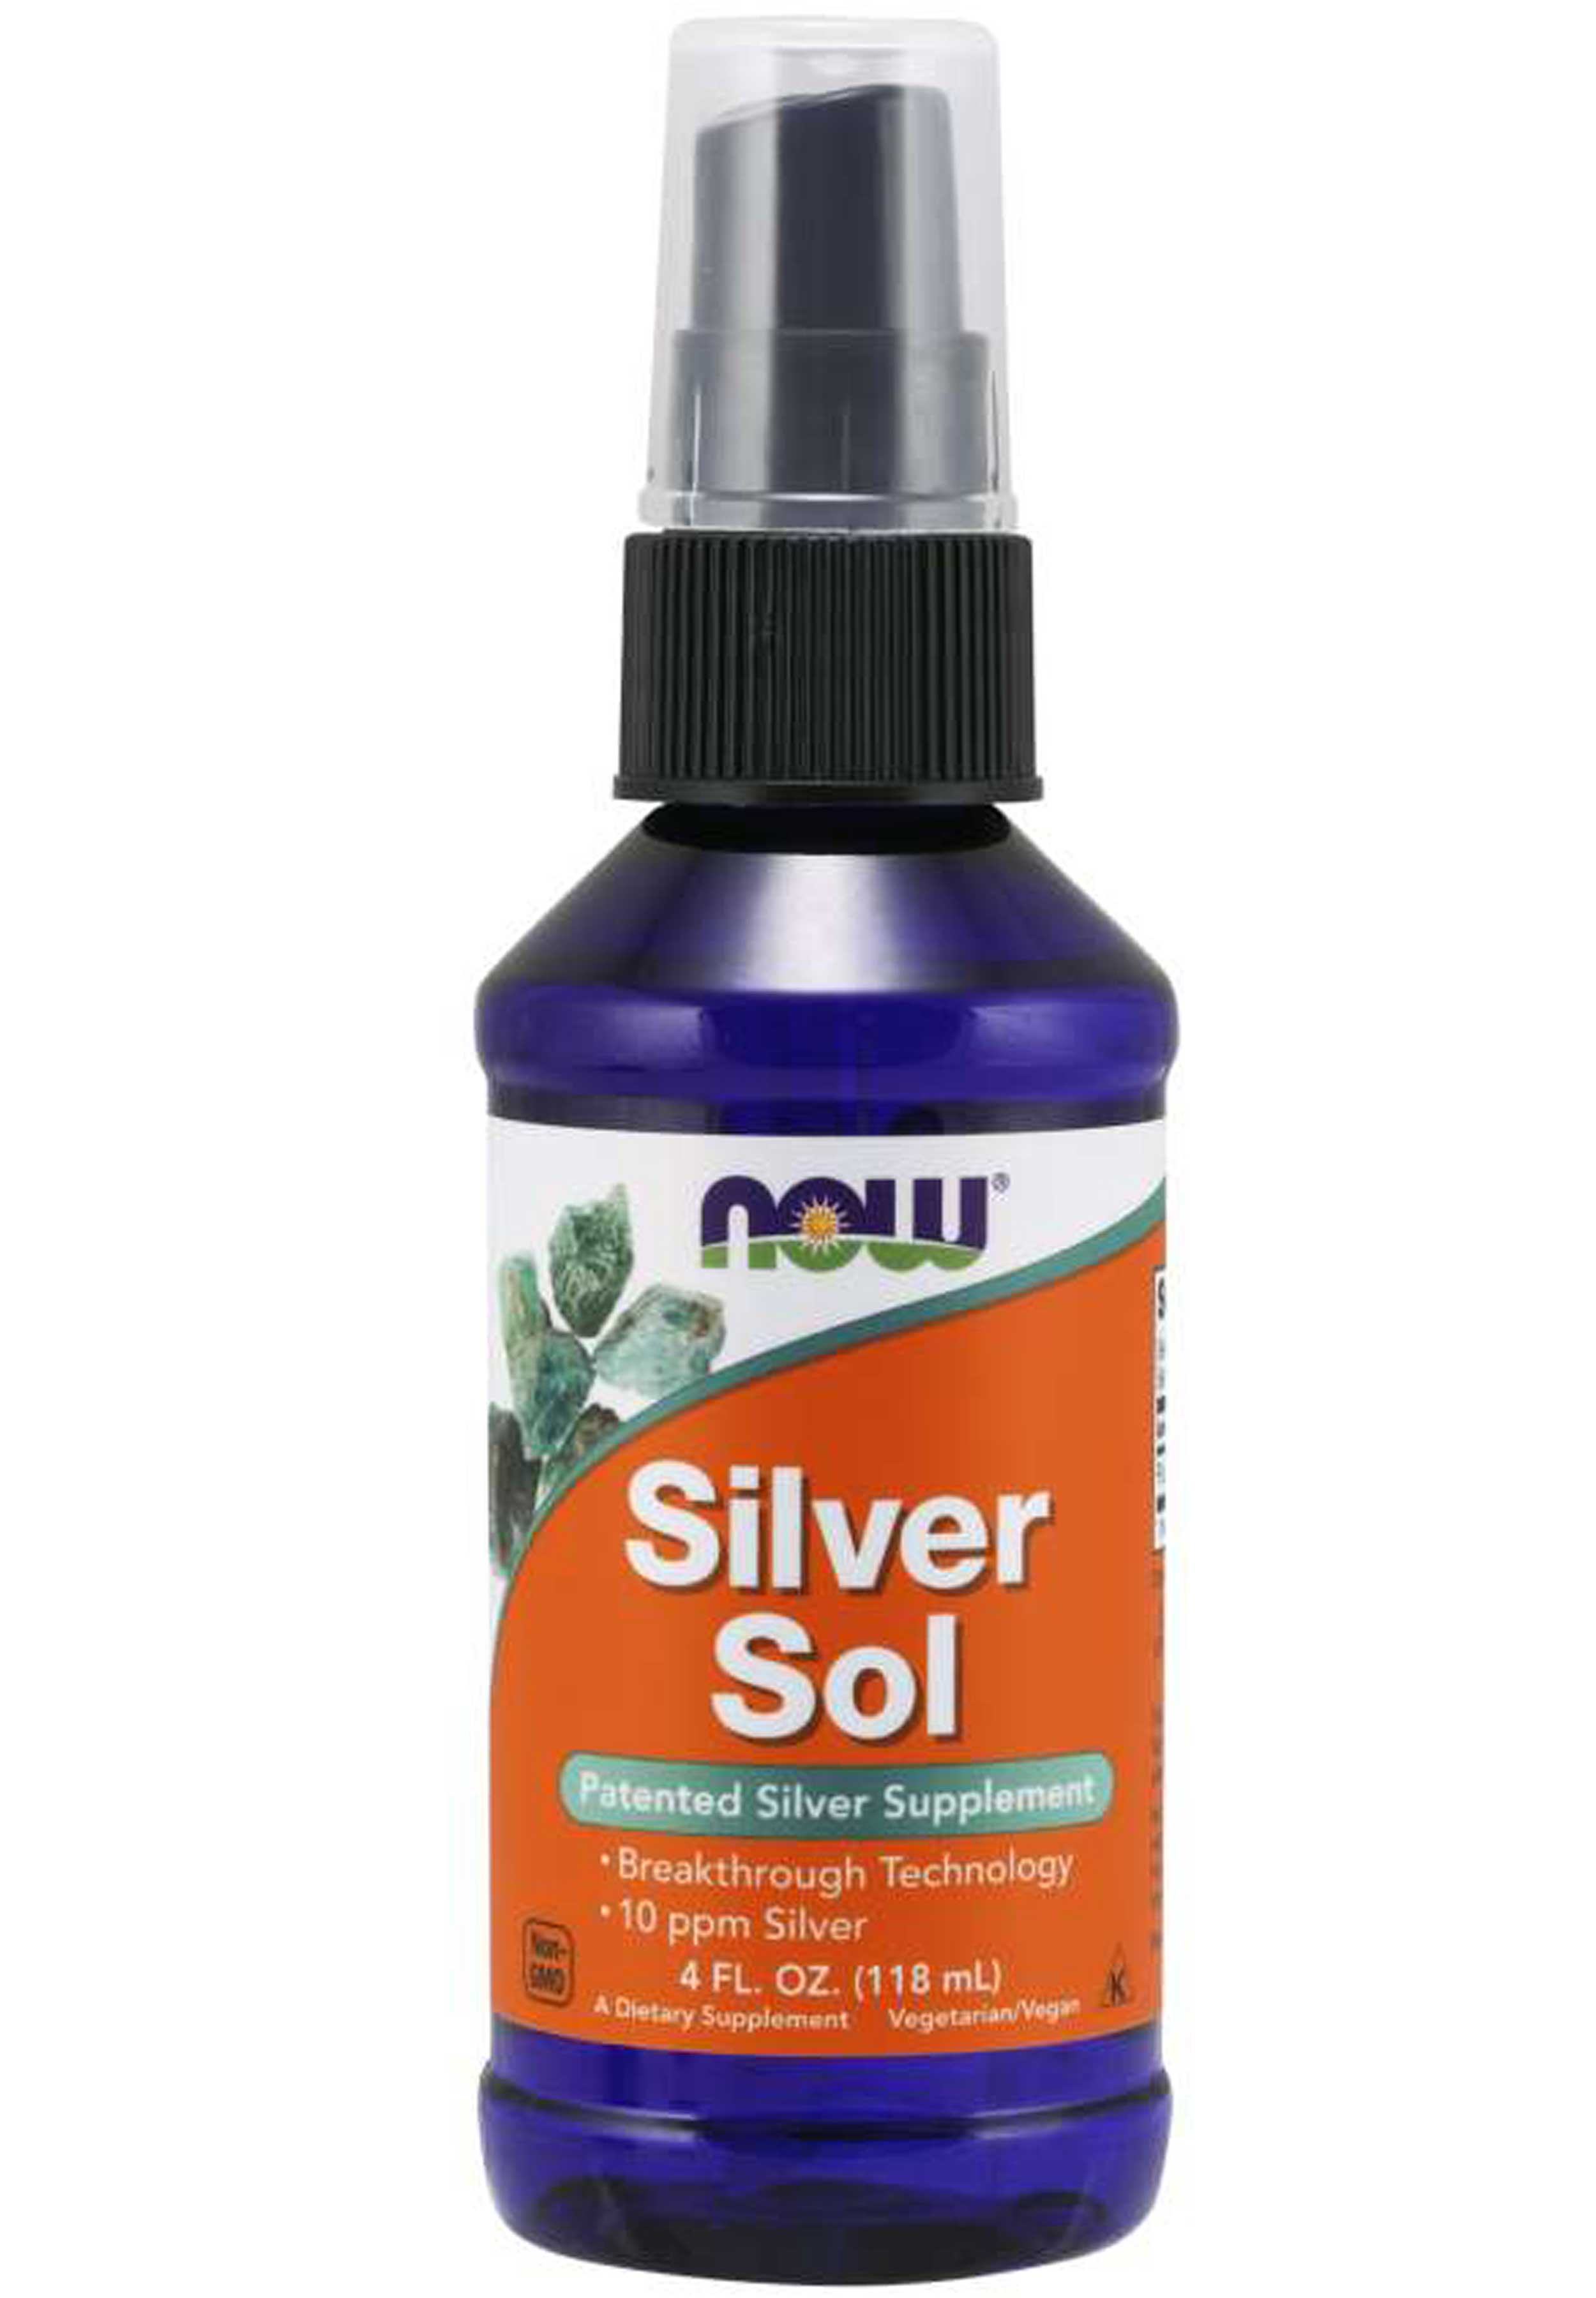 NOW Silver Sol